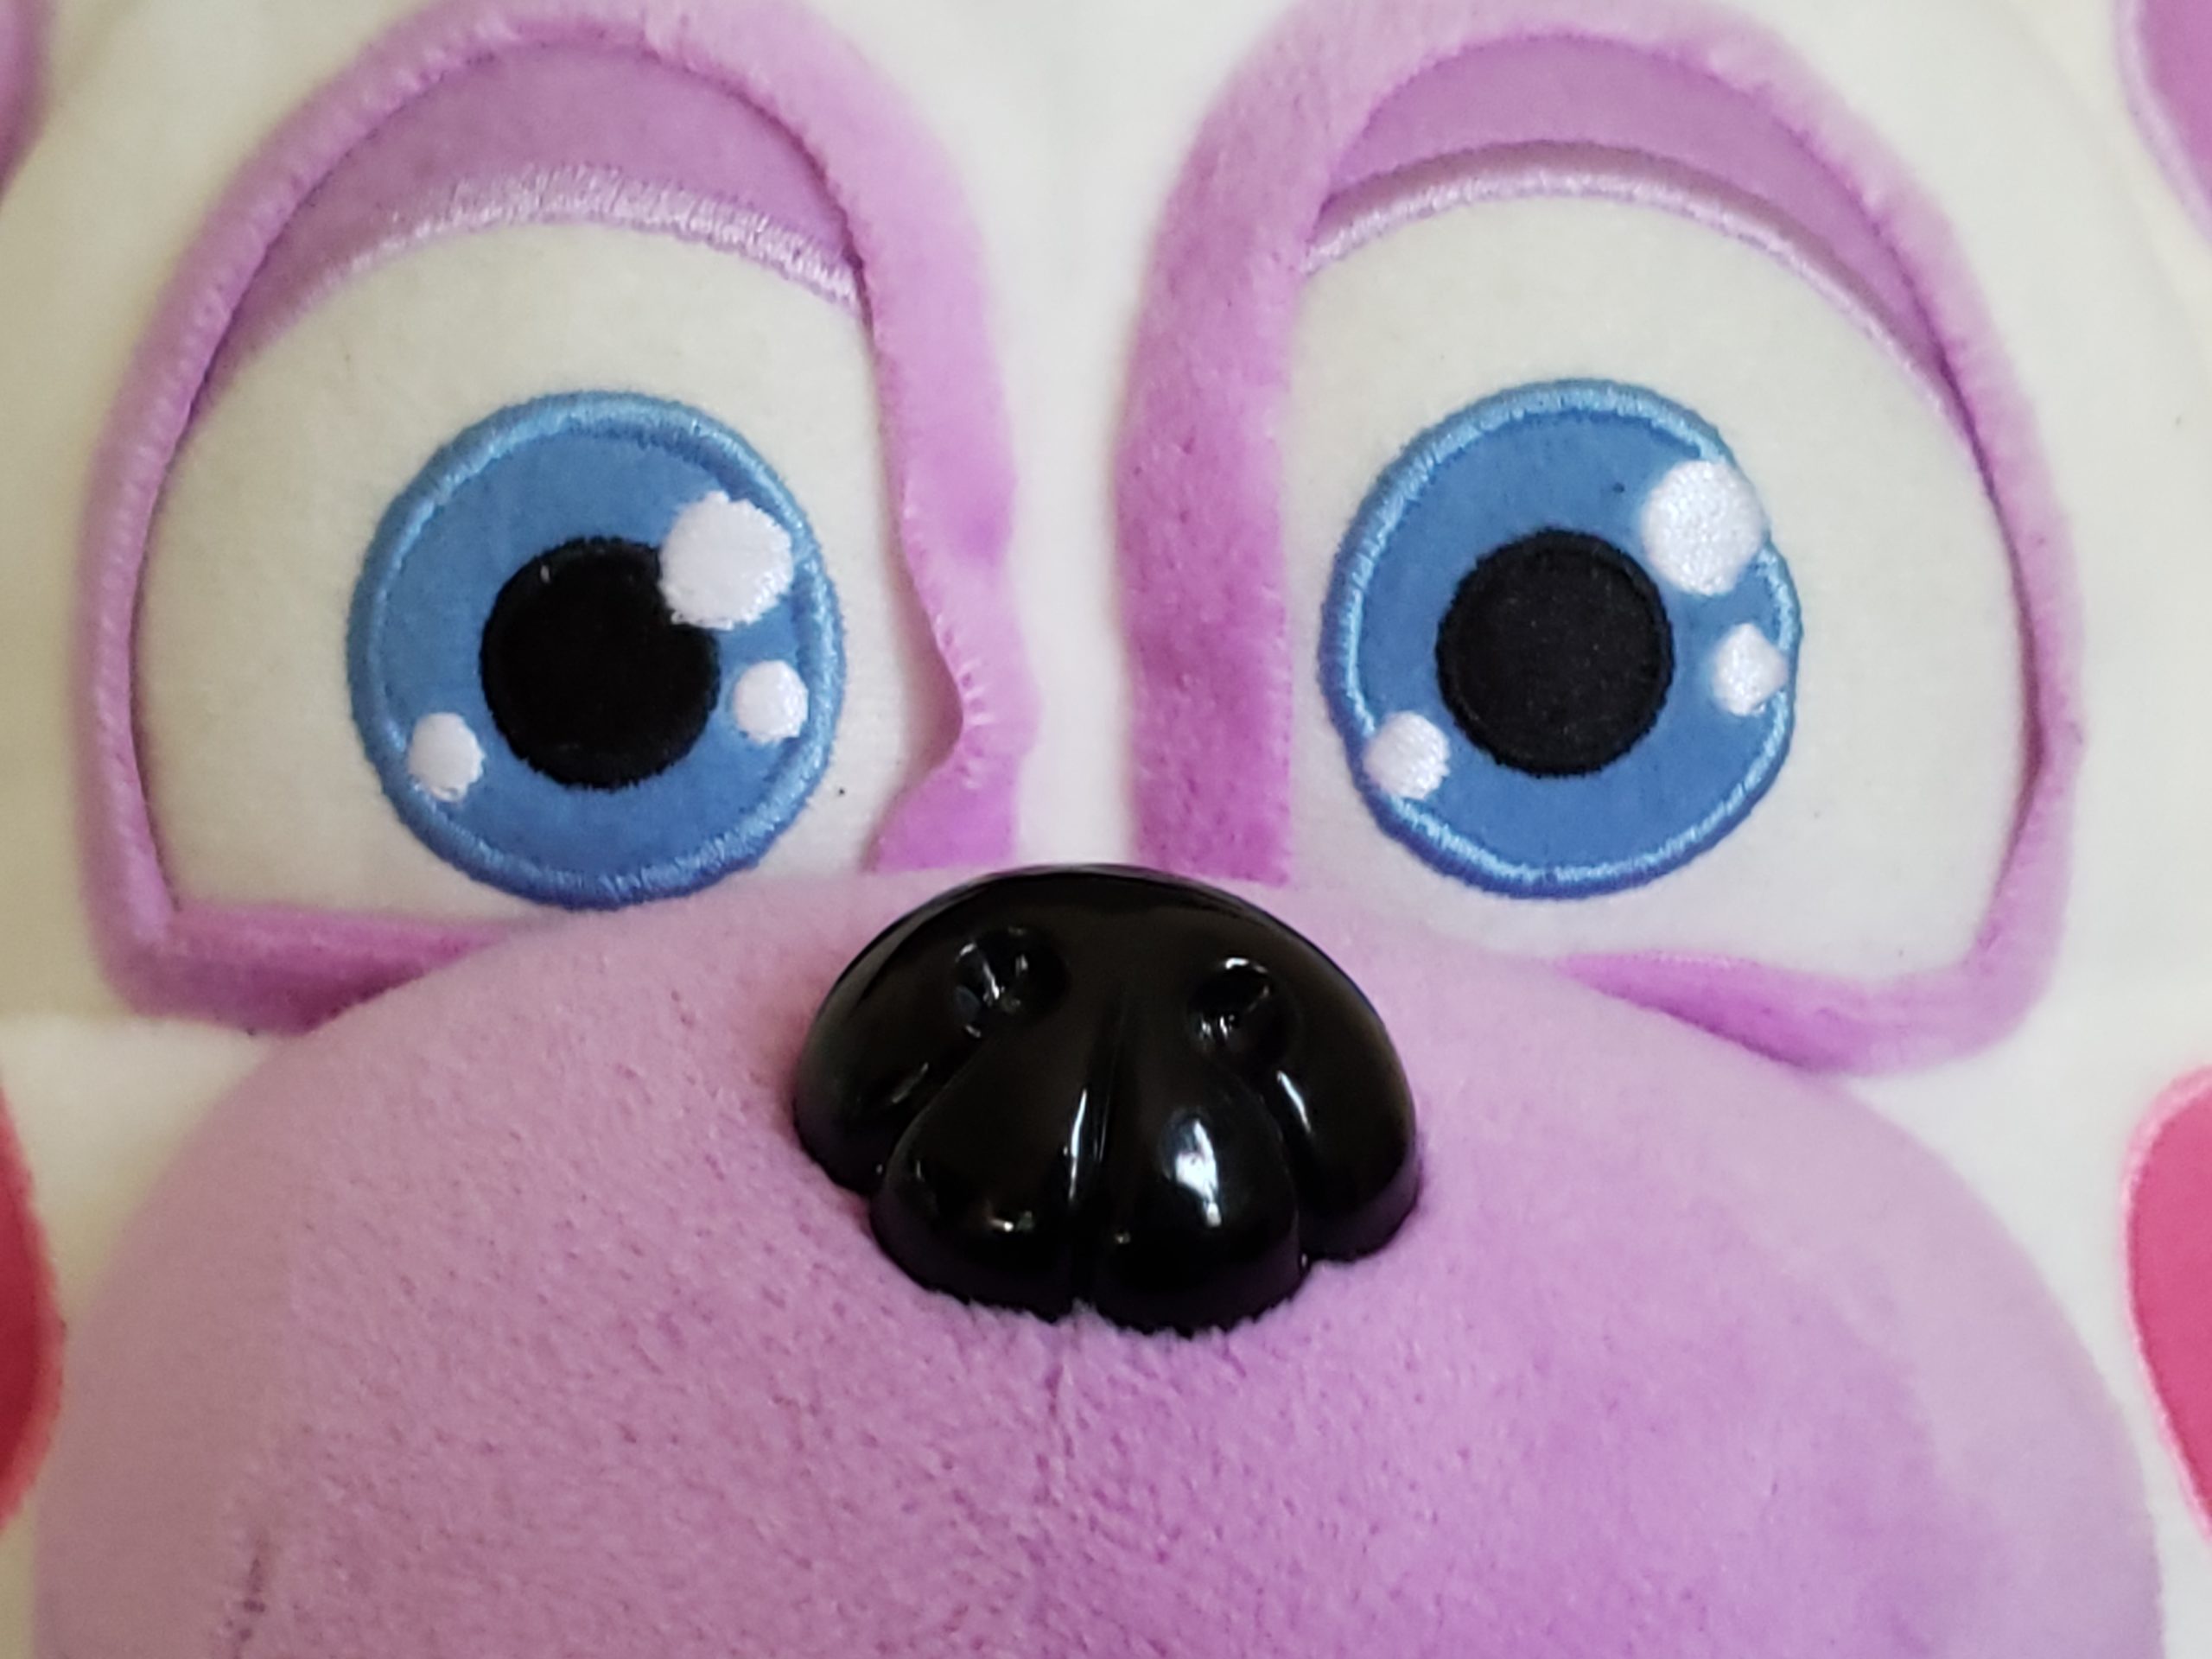 five nights at freddy's helpy plush